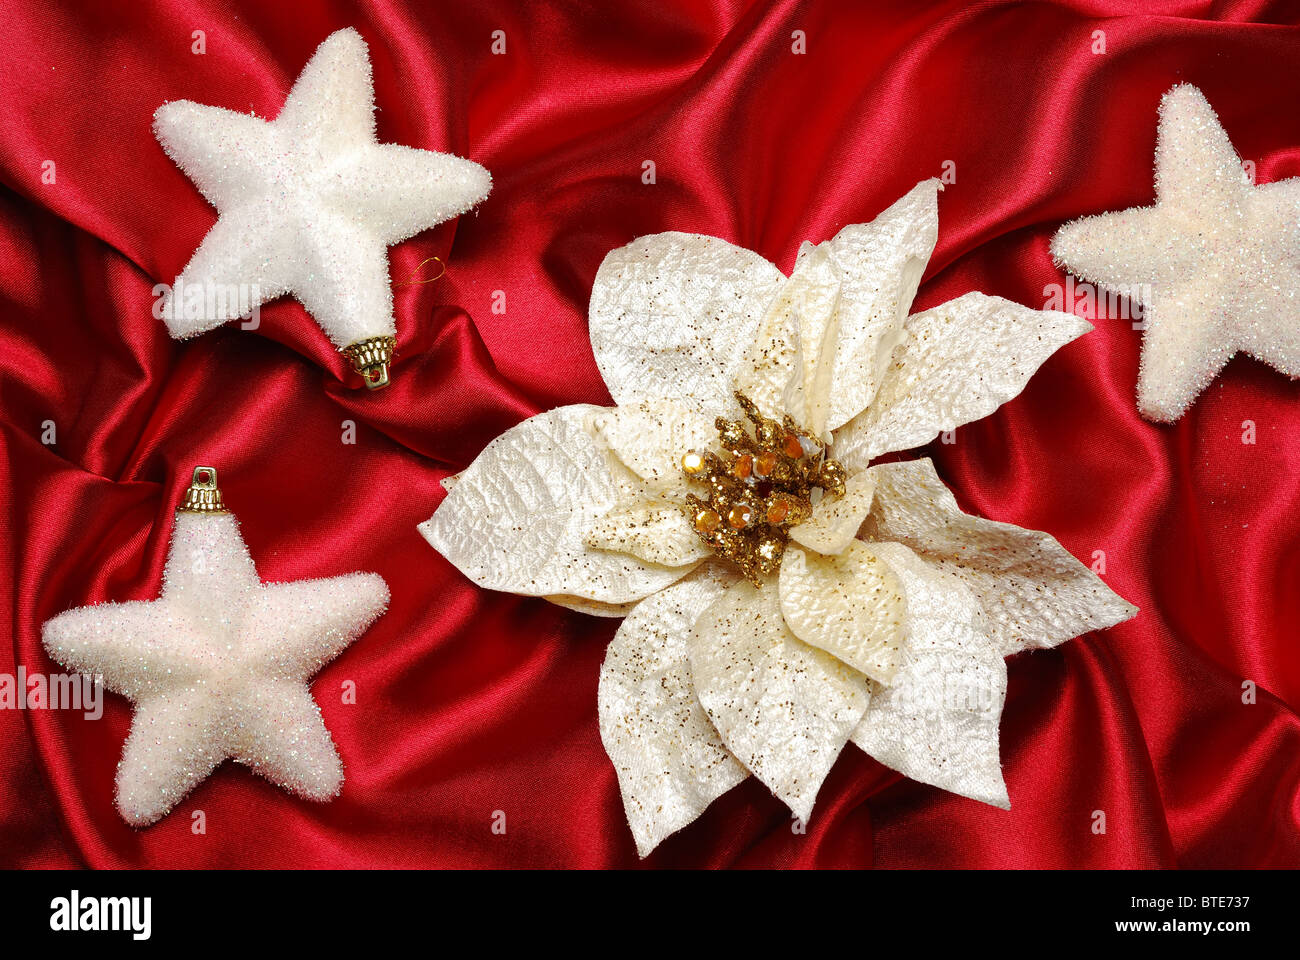 Christmas Material, X'mas Flower 、pinus, Christmas Hat And Stocking On Red  Background Stock Photo, Picture and Royalty Free Image. Image 194316622.